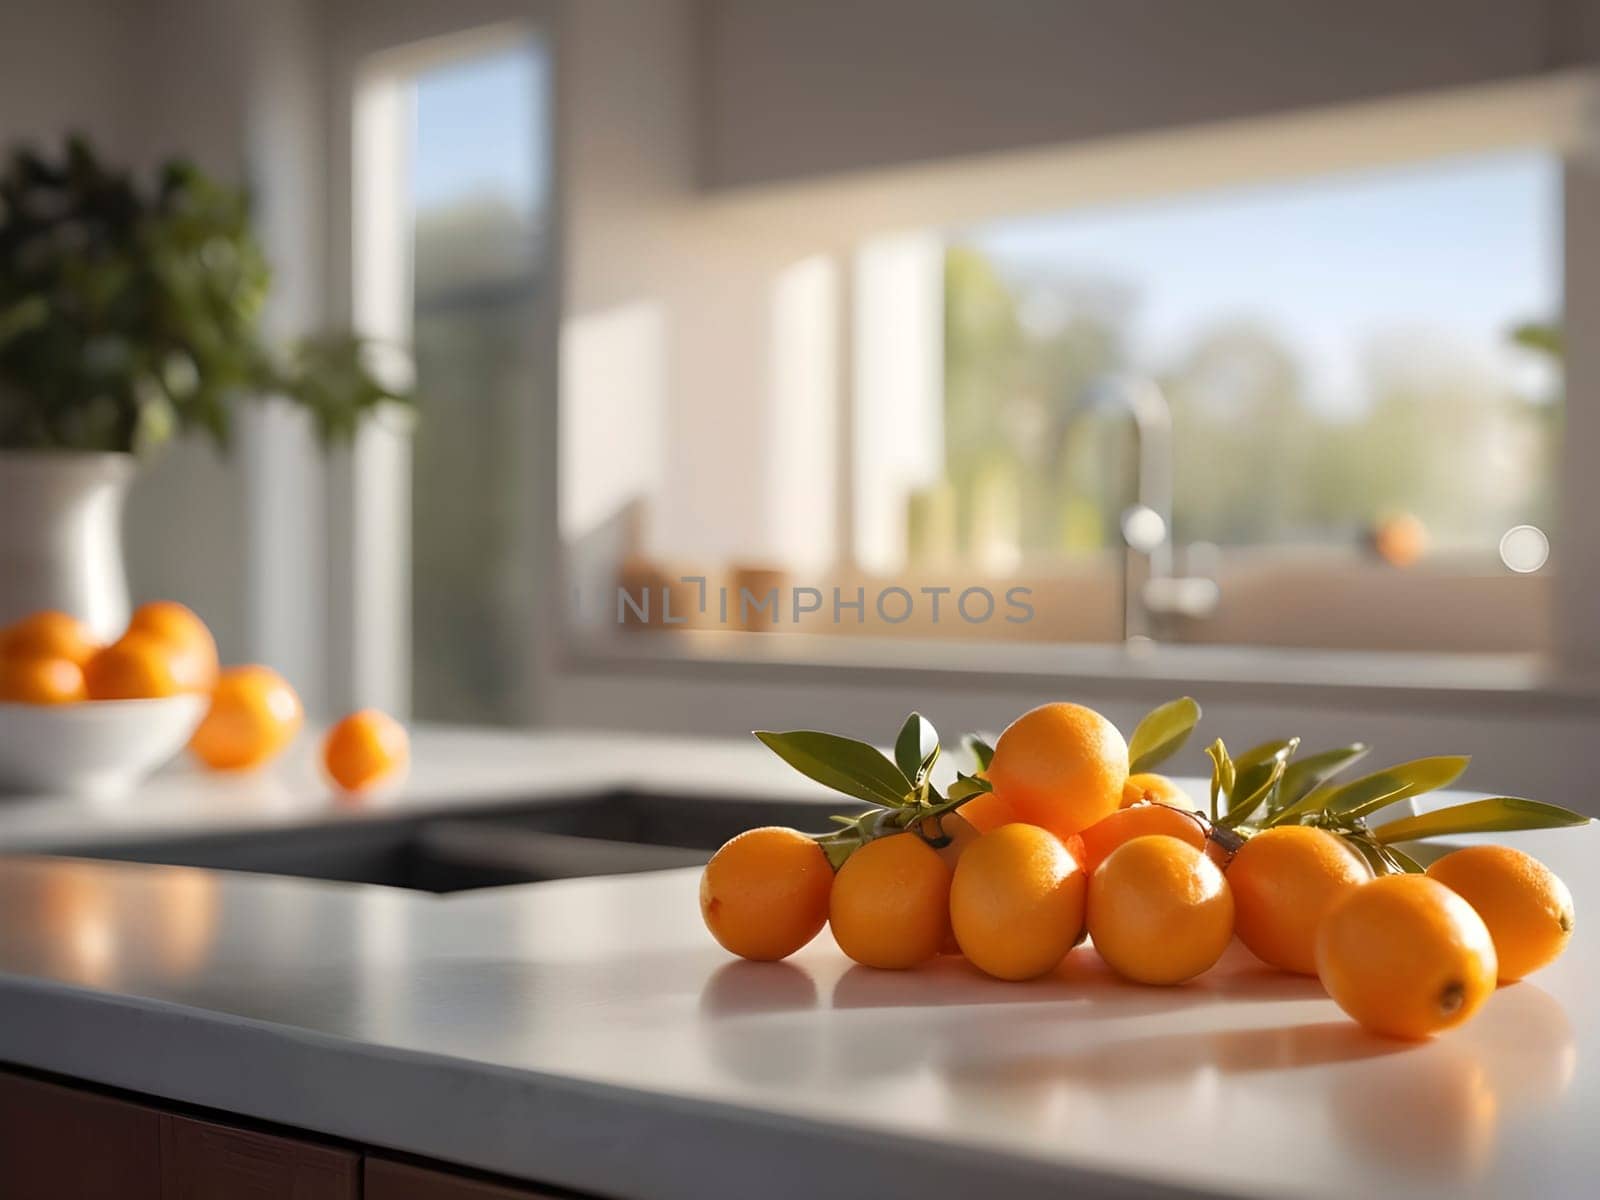 Kitchen Radiance: A Welcoming Atmosphere with a Centered Kumquat.